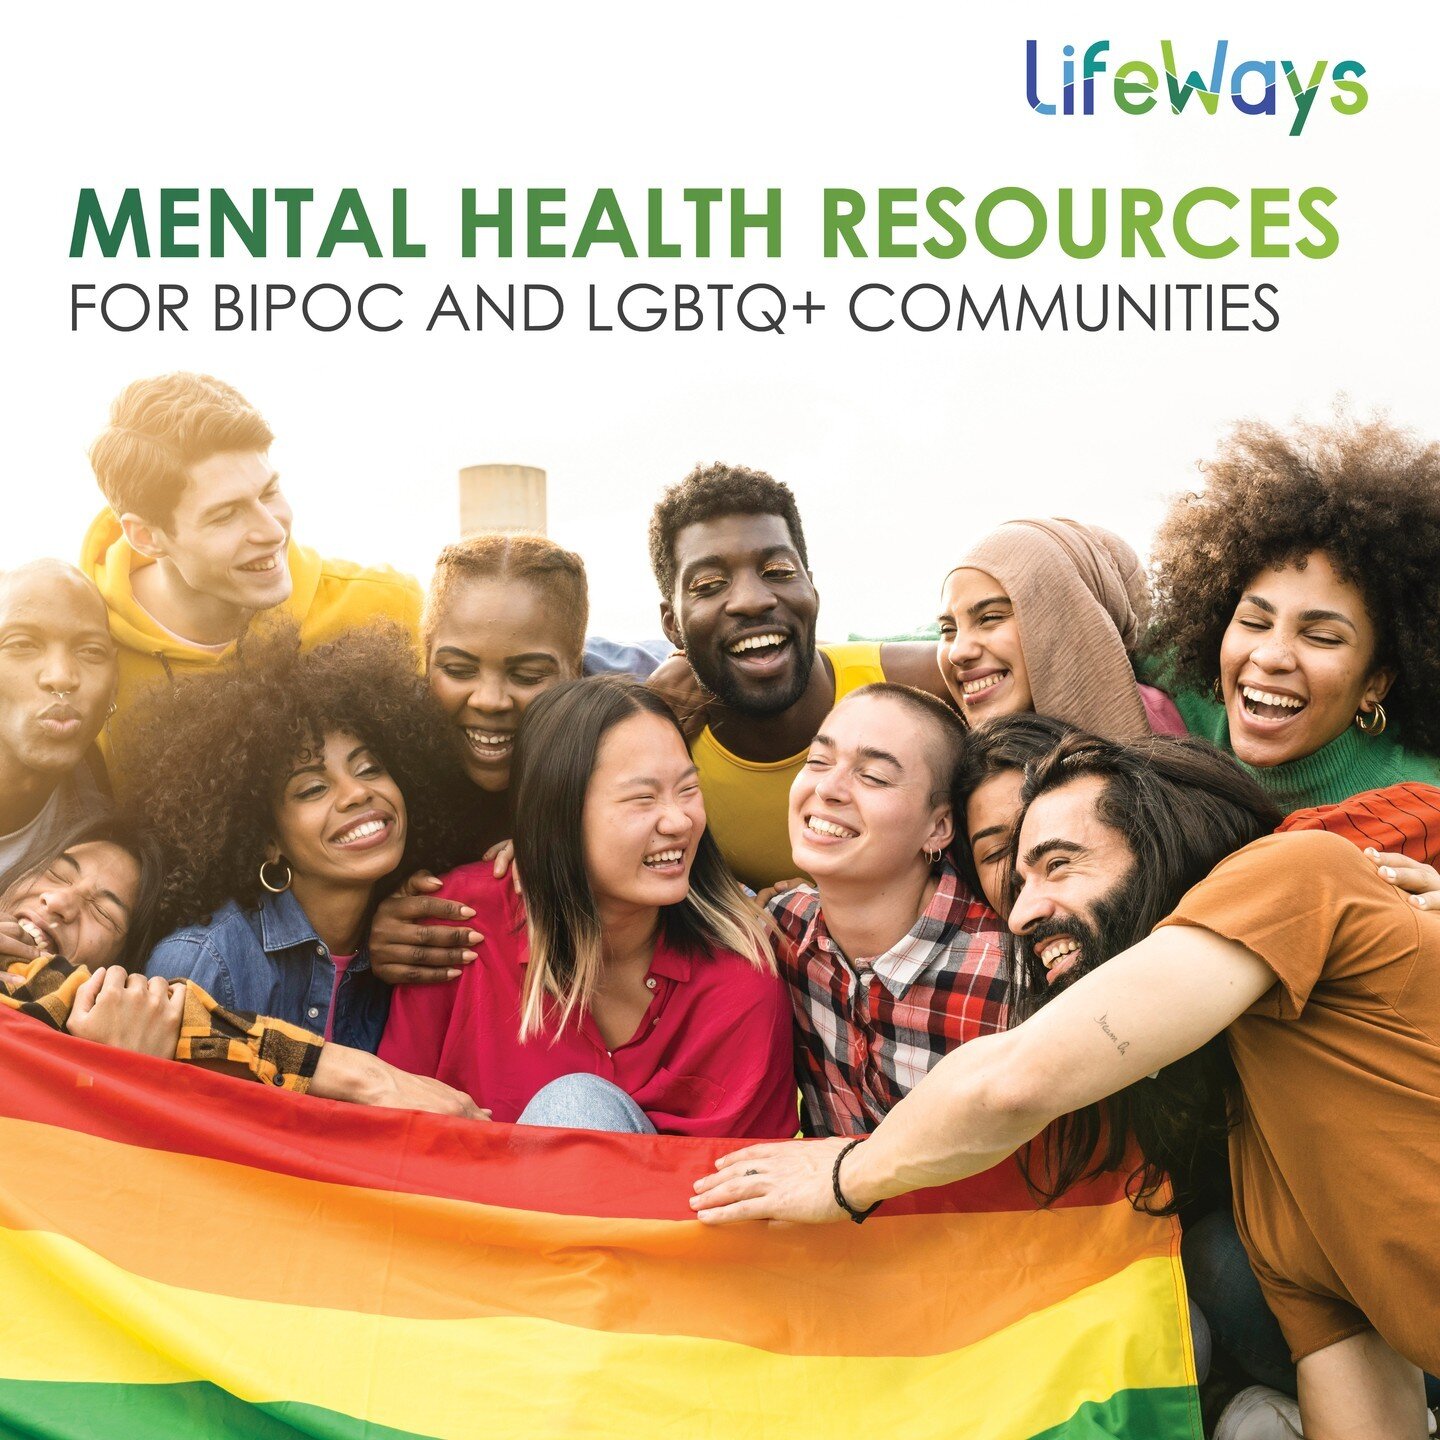 Need additional mental health resources? This list highlights trusted alternative mental health supports that were created by BIPOC or LGBTQ+ communities for BIPOC or LGBTQ+ communities. We hope that these resources help aid in your mental health jou